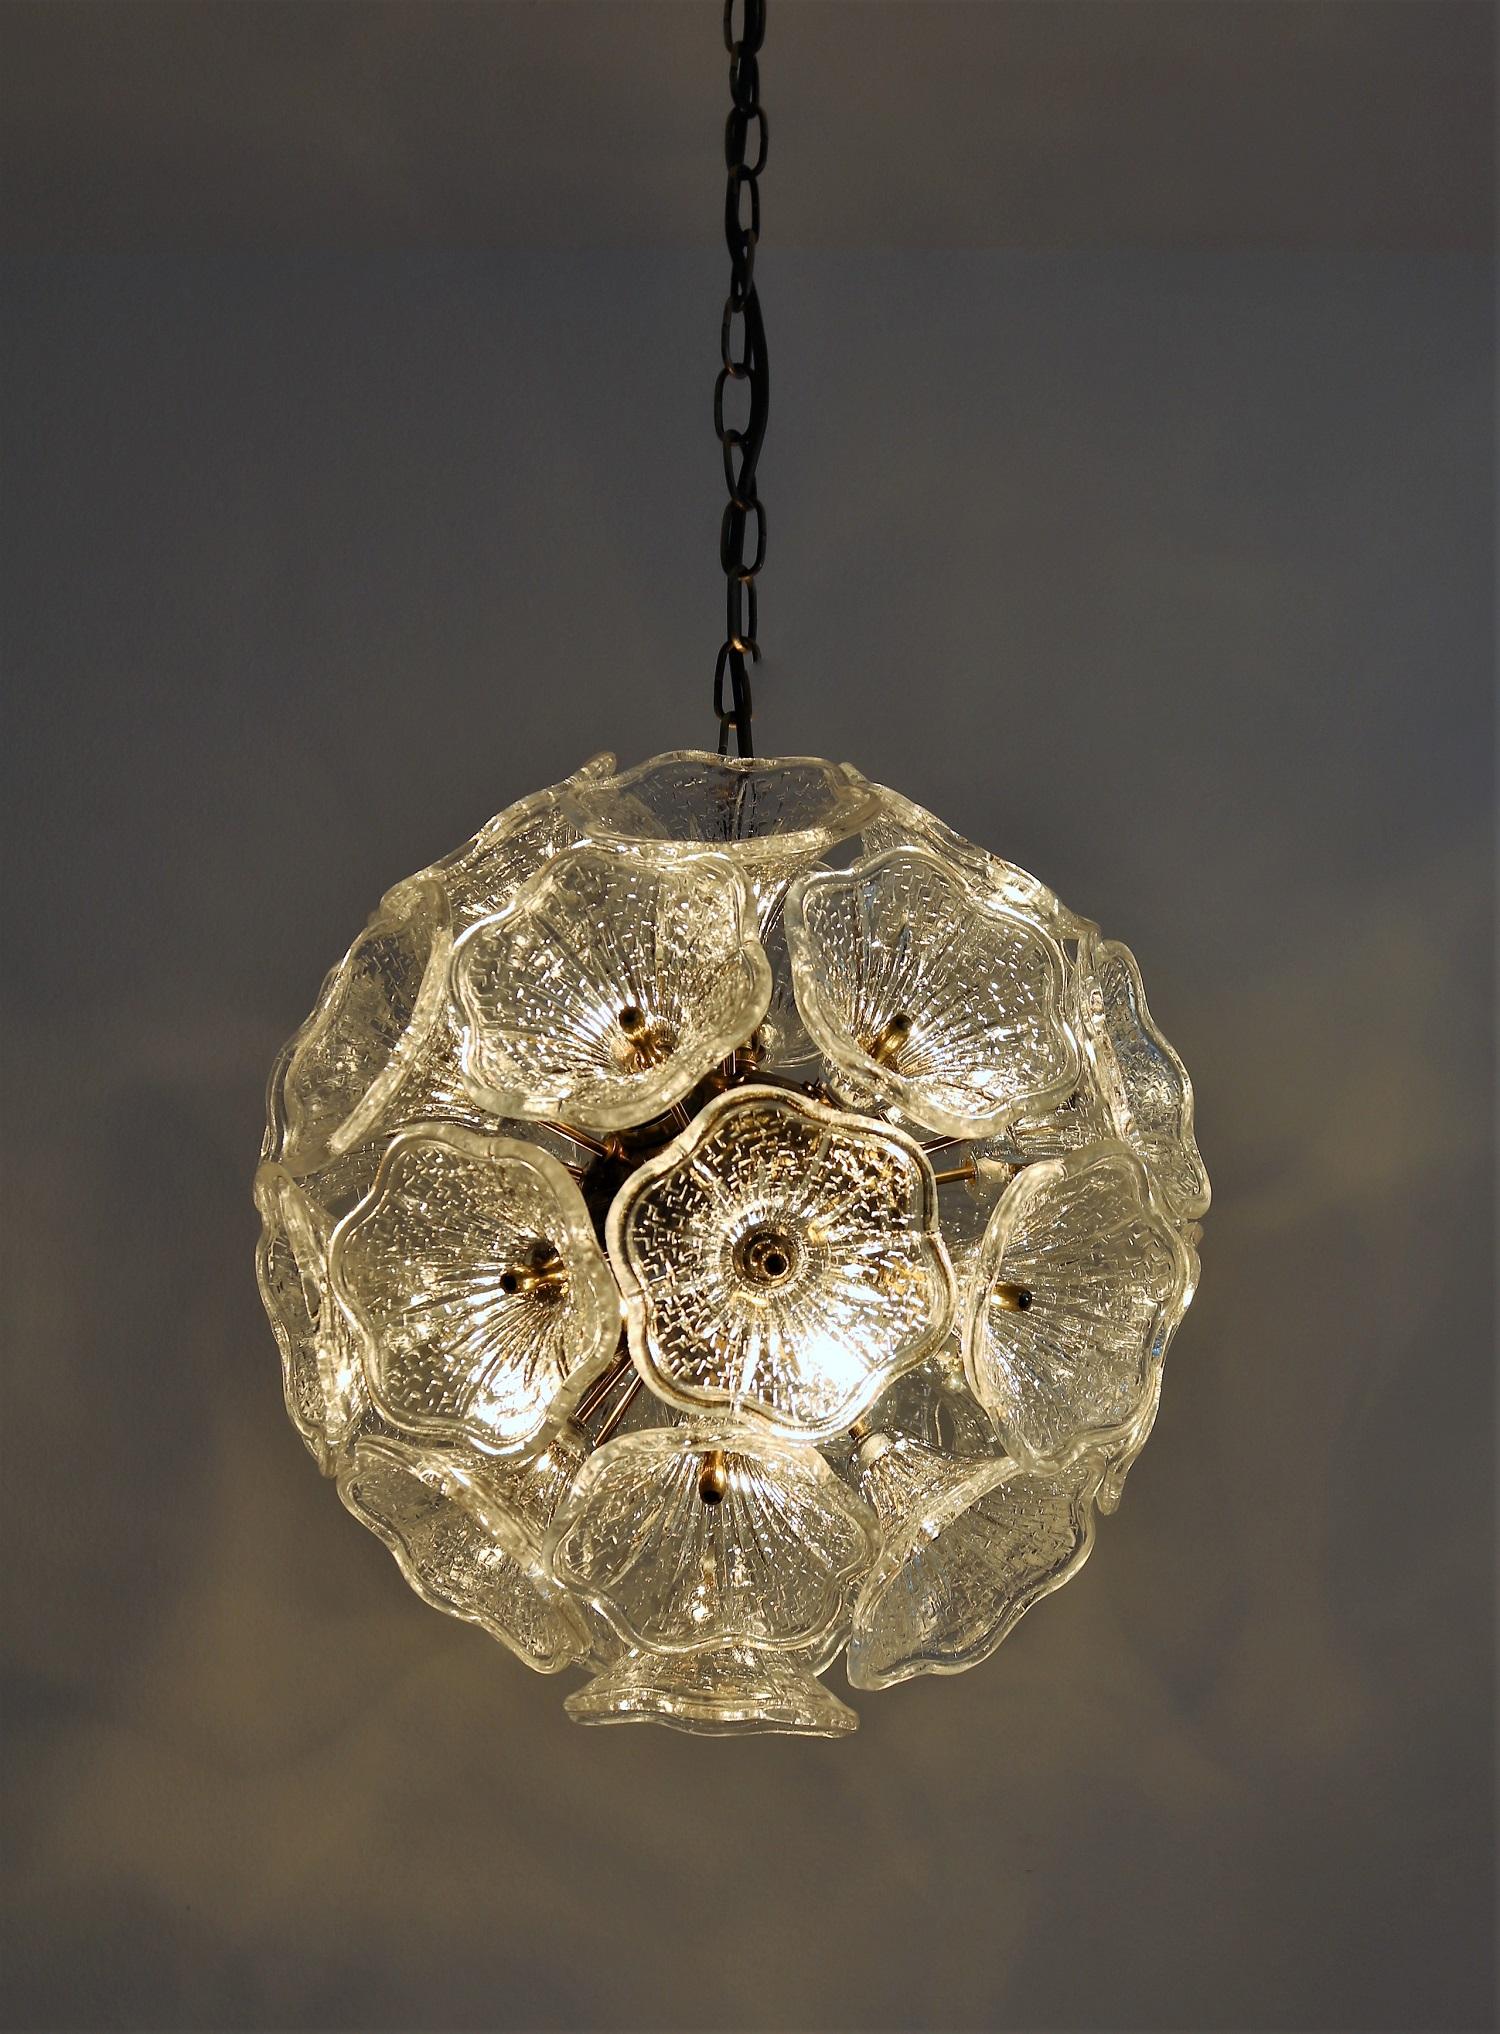 Gorgeous spherical Sputnik chandelier with 31 big glass flowers of high quality which are mounted with custom brass screws on dedicated brass globe. Inside the brass globe are the bulb holders for small candelabra bulbs.
The chandelier is original